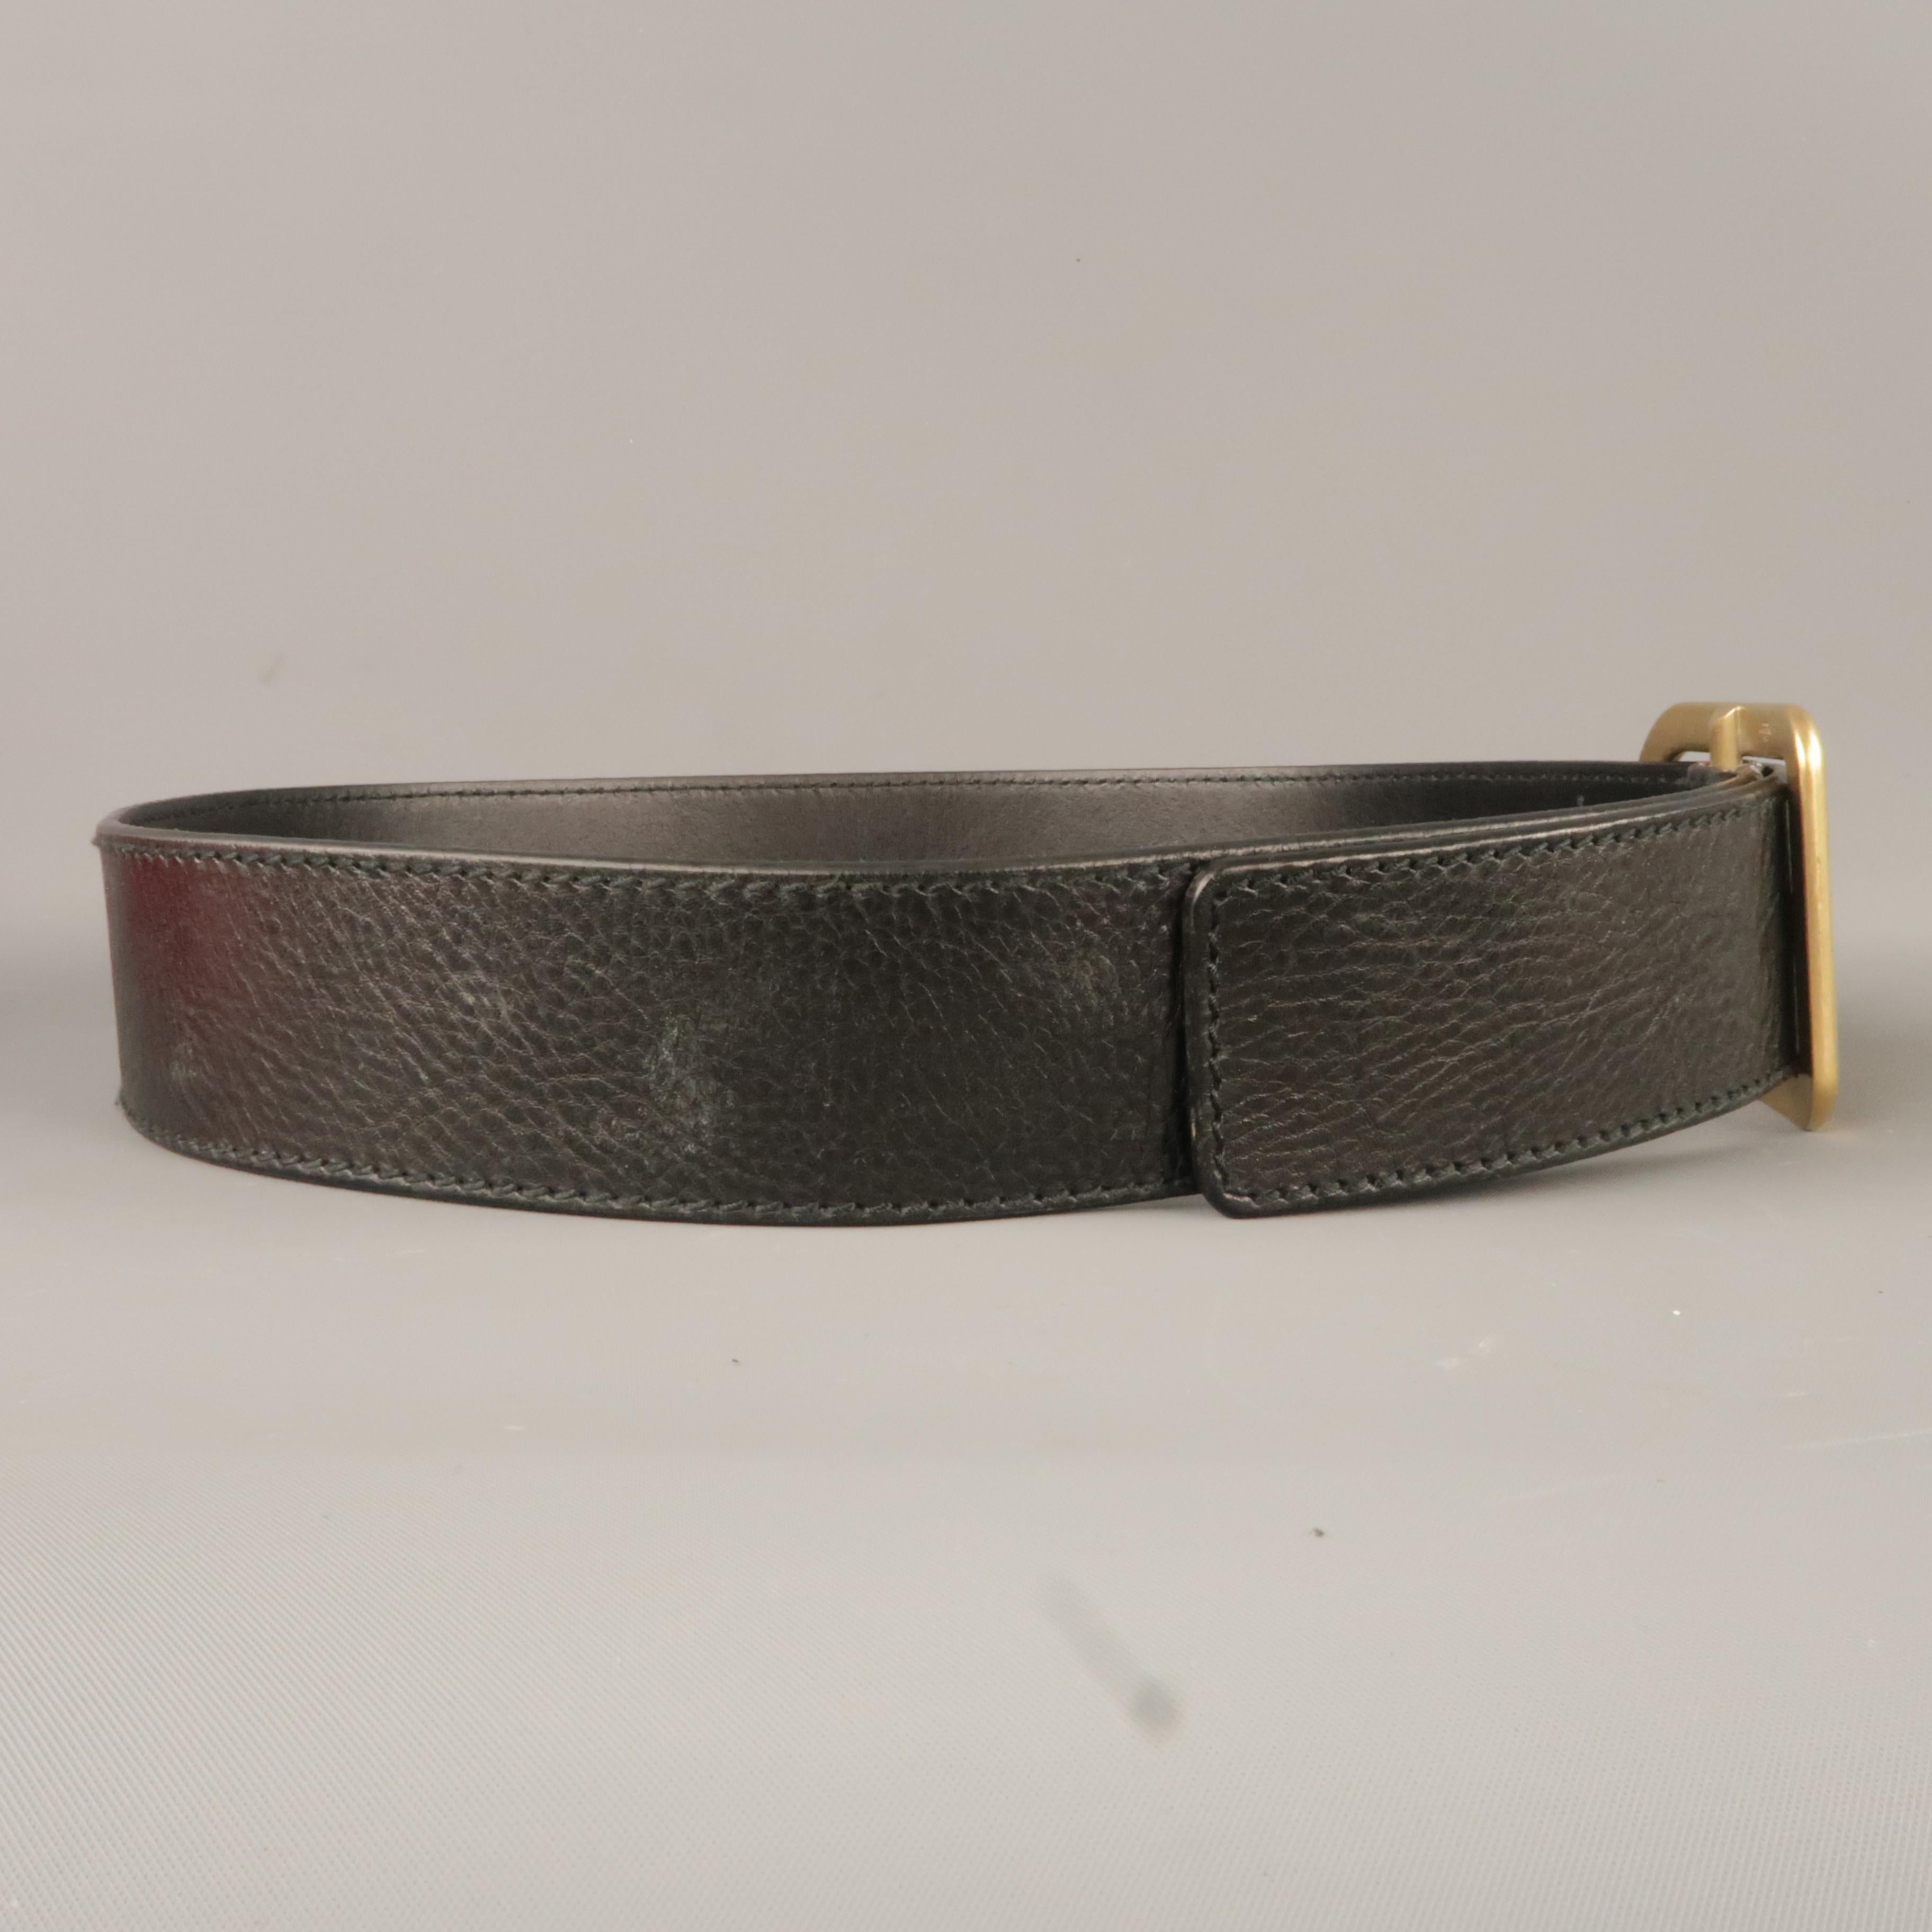 VALENTINO GARAVANI belt comes in a black leather featuring a gold tone buckle. Made in Italy.
 
New With Box.
Marked: 35/34
 
Length: 38 in.
Width: 1.8 in.
Fits: 30 - 34 in.
Buckle: 2 in.